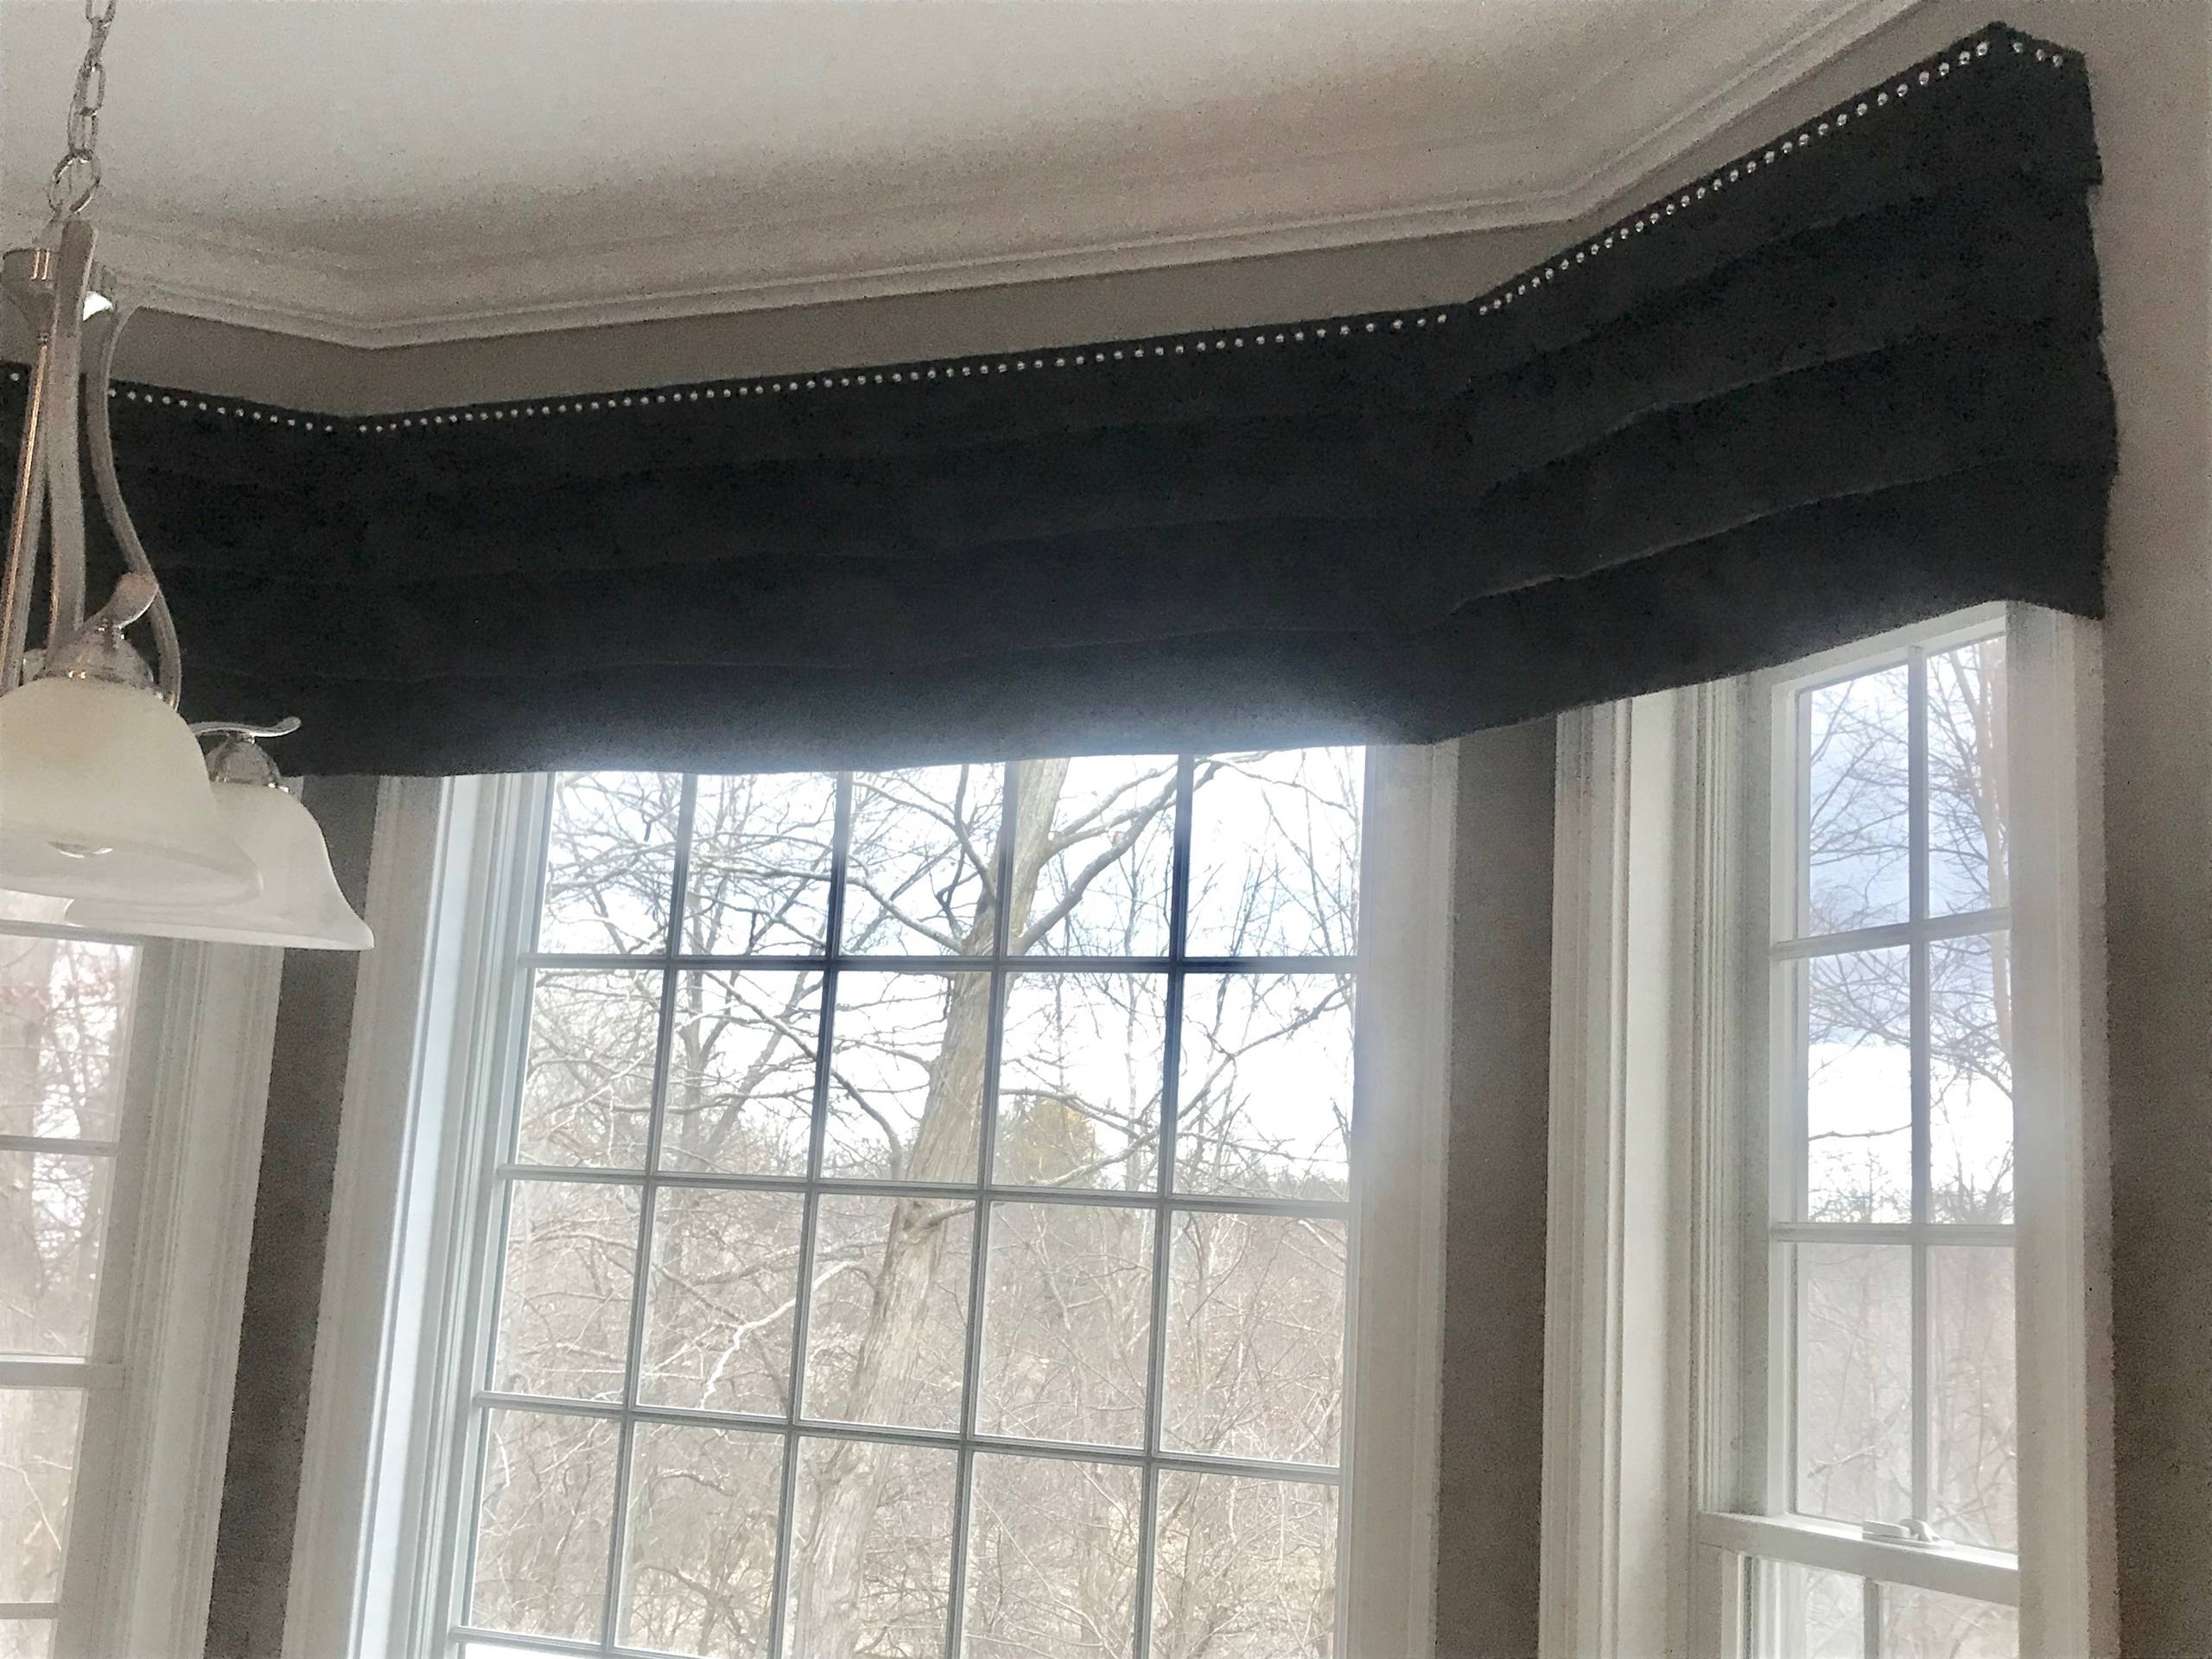 Window treatments, Drapes, Shades, Valances, Cornices, Shutters and Blinds,